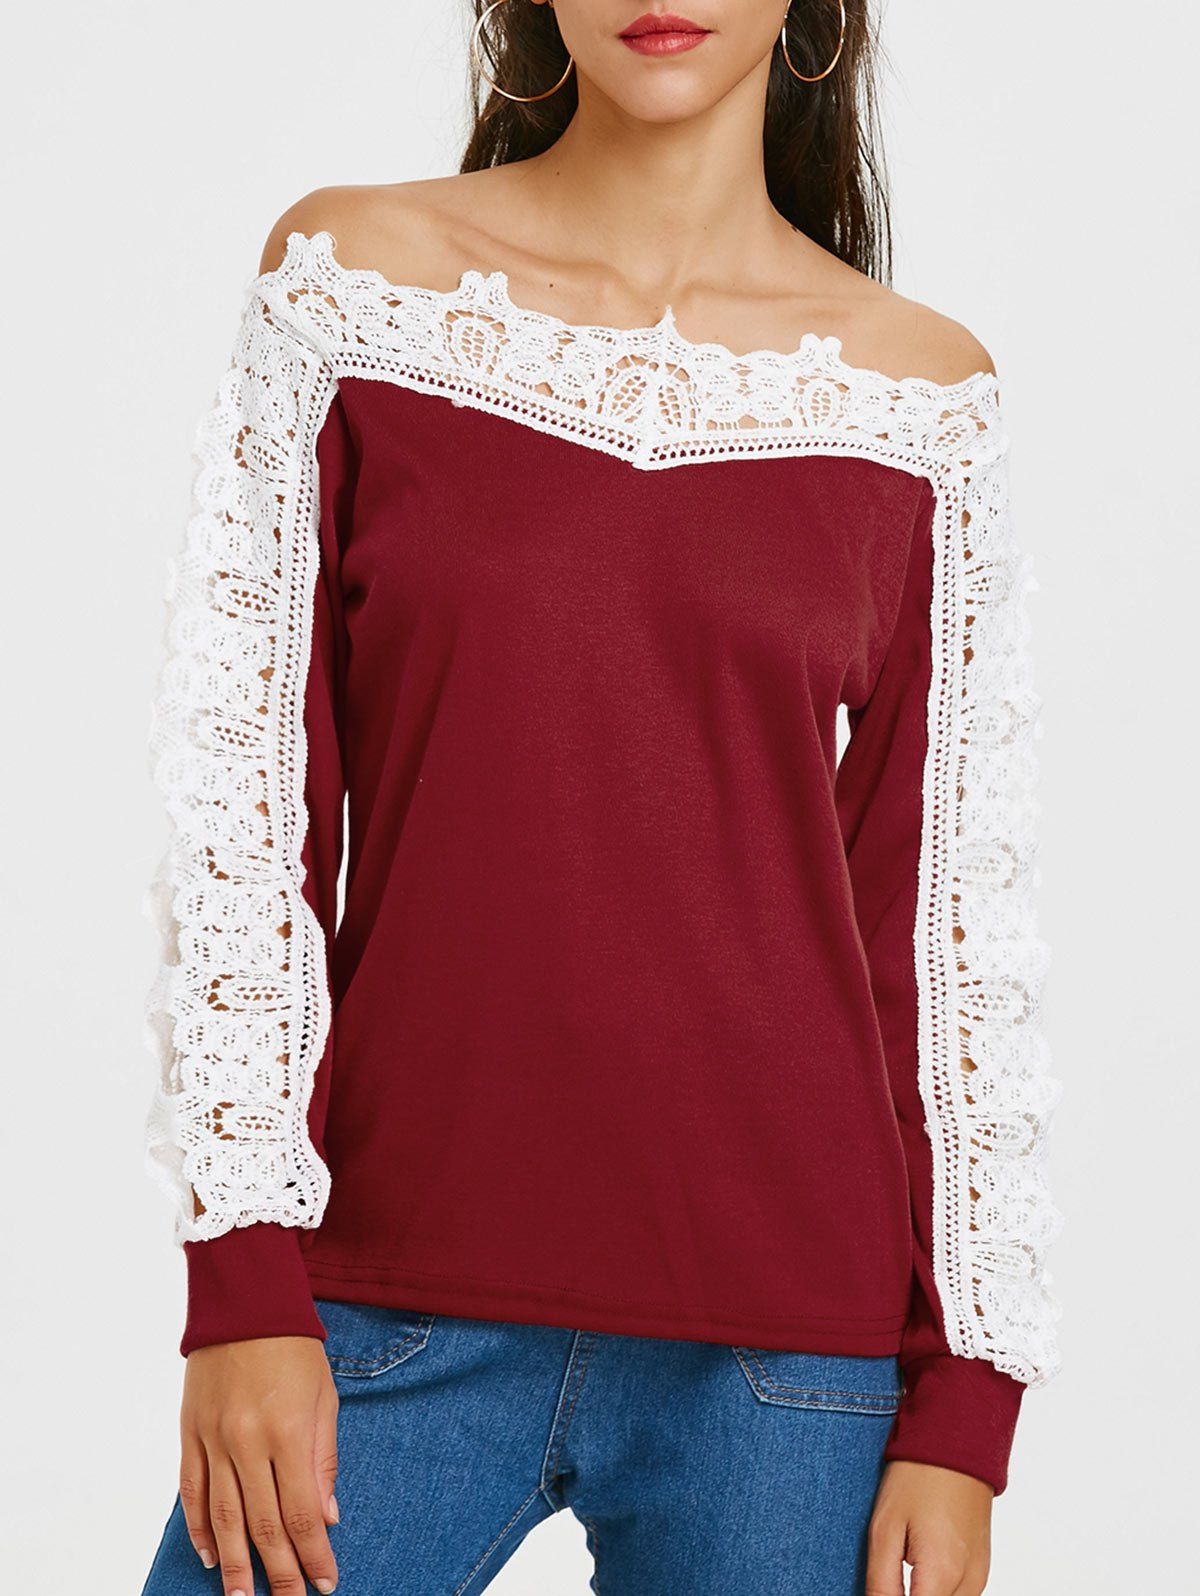 Long Sleeve Openwork Lace Panel T-shirt - WINE RED S